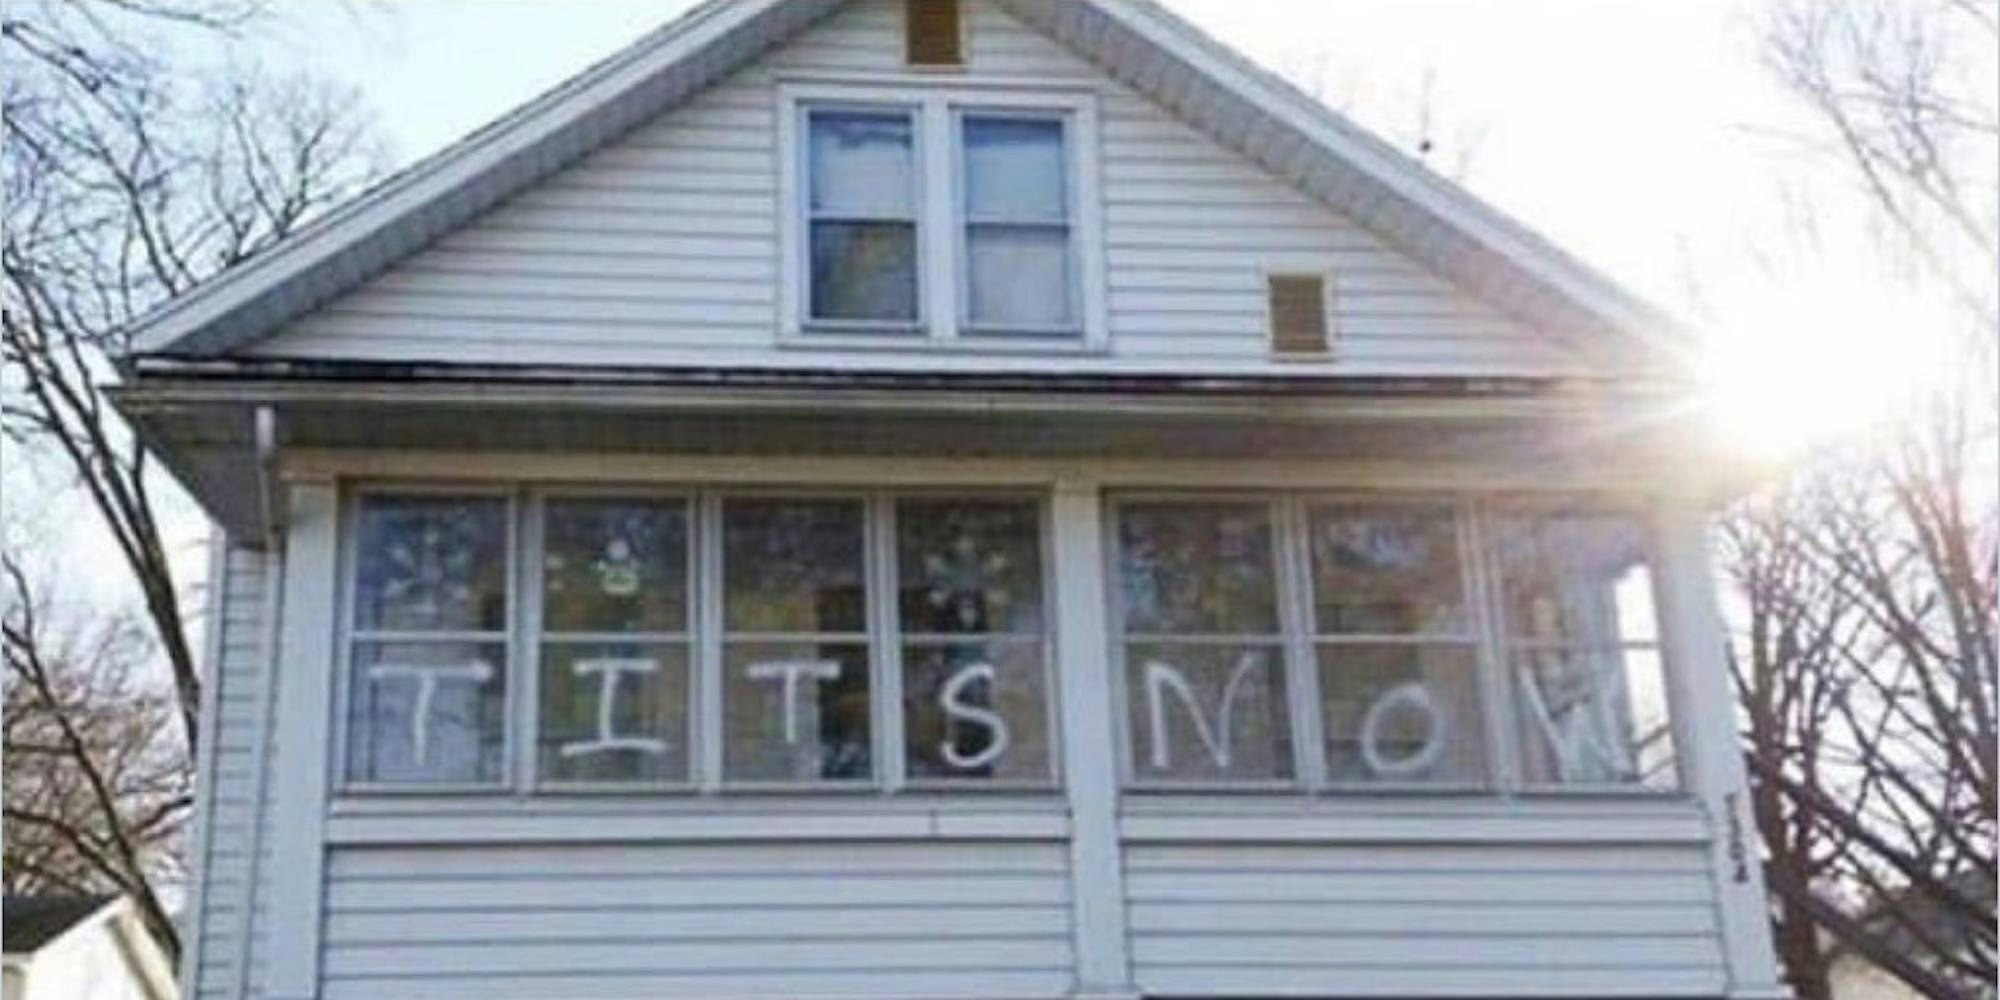 photograph of a house showing tits now written on the windows